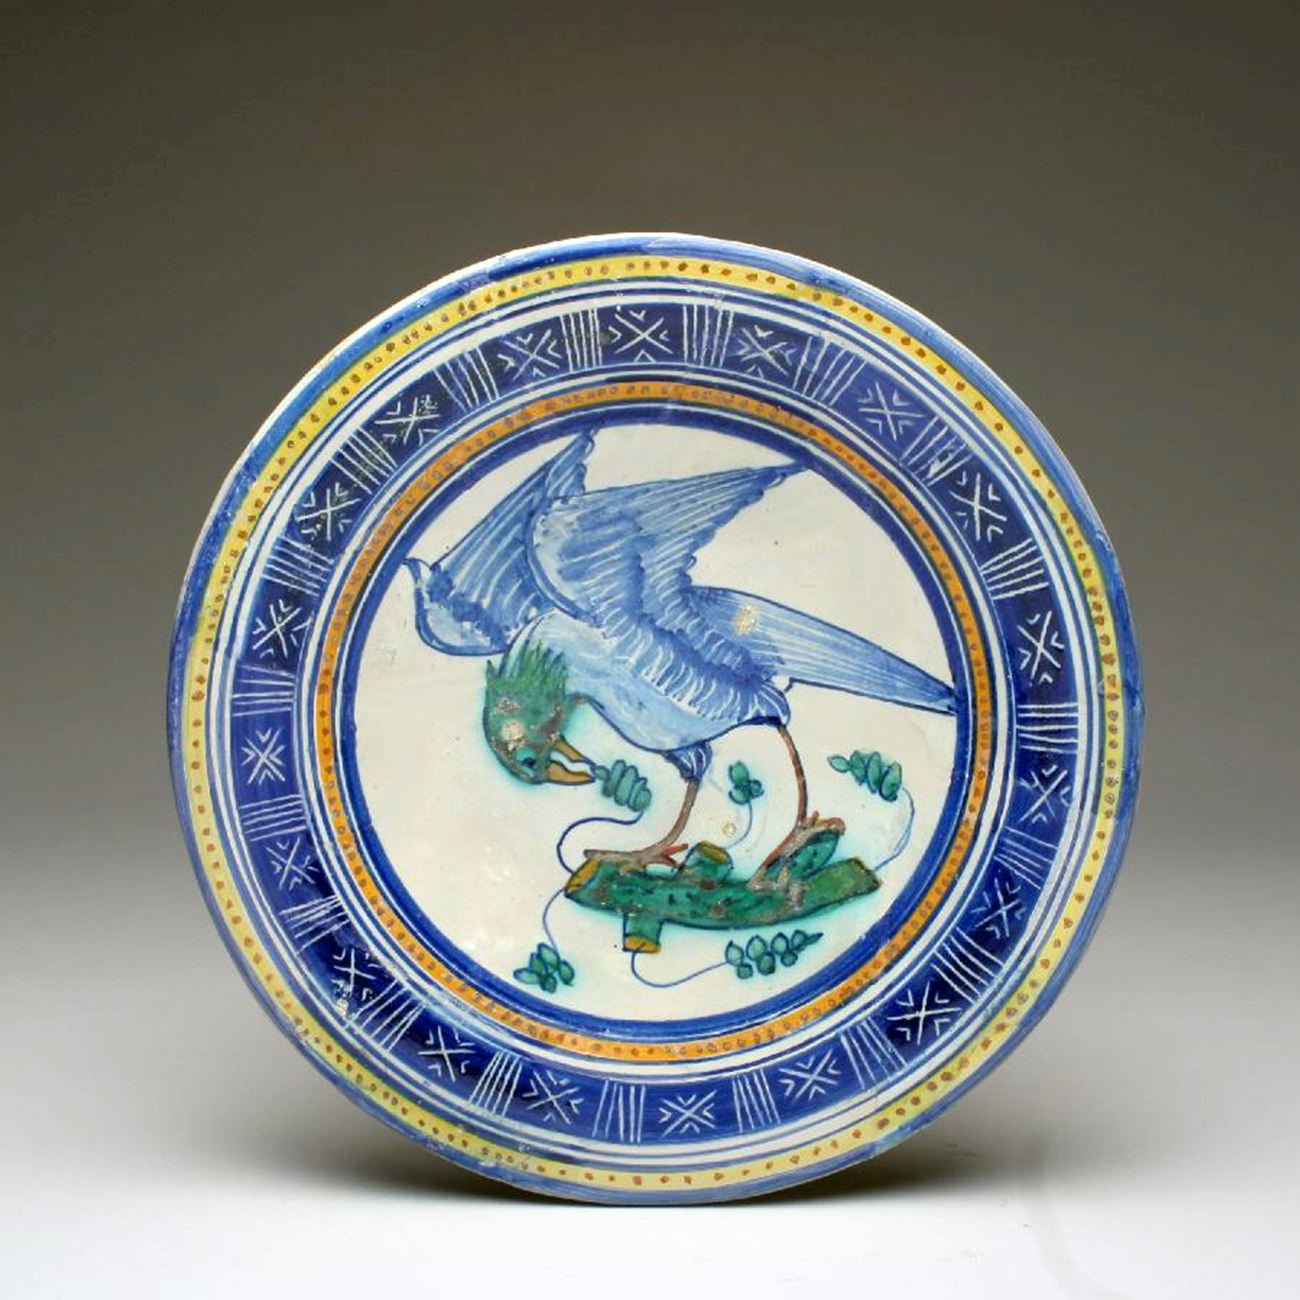 Blue plate from the 1500s